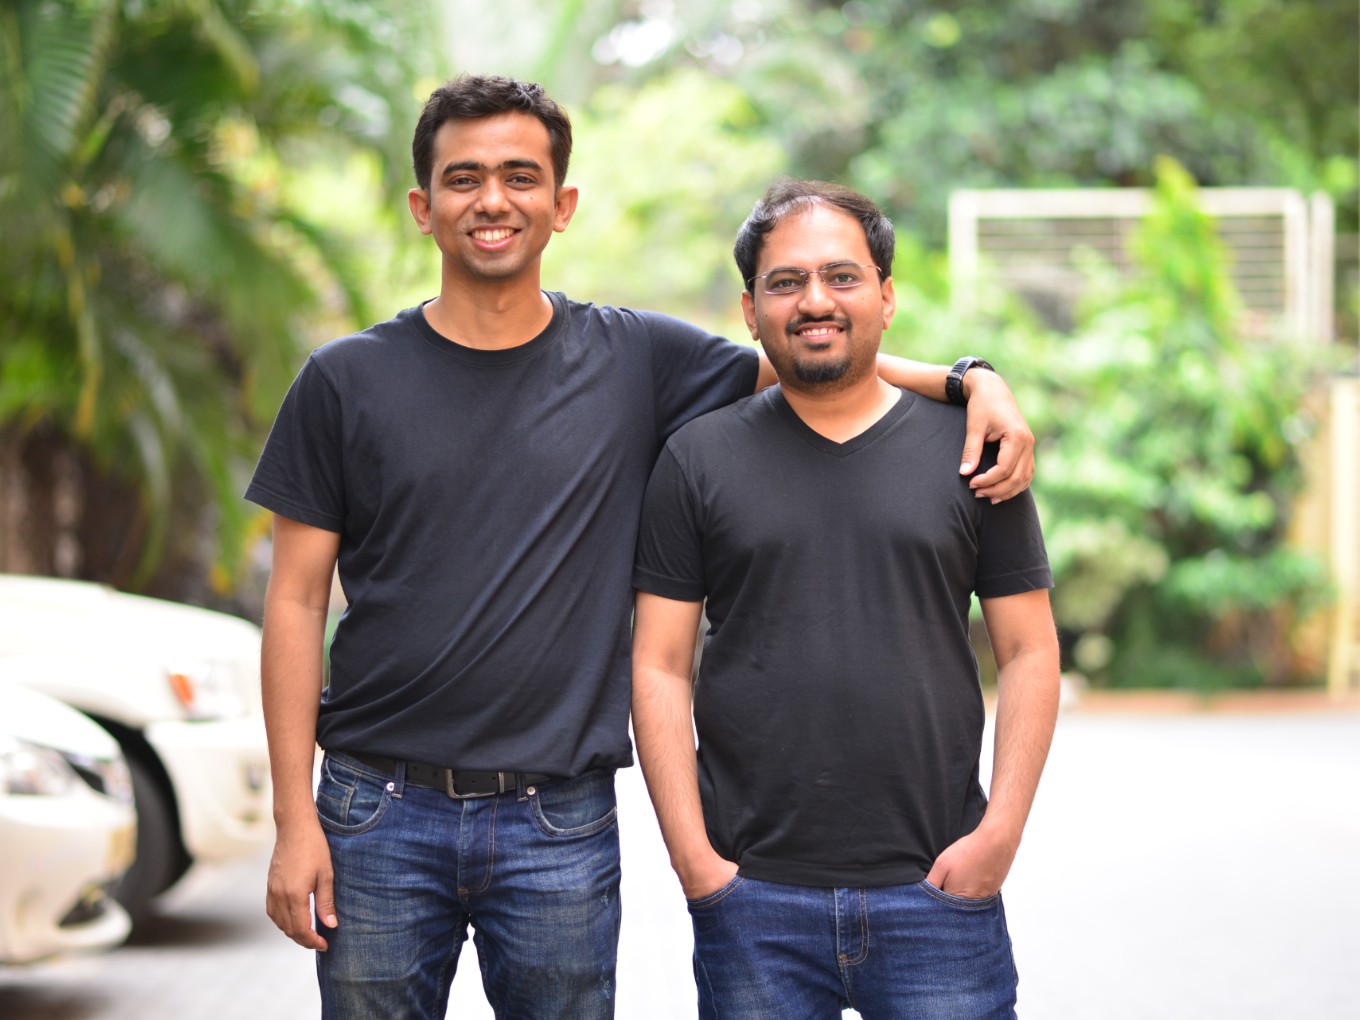 How Fintech SaaS Startup Recko Is Using Automation To Solve Payments Reconciliation